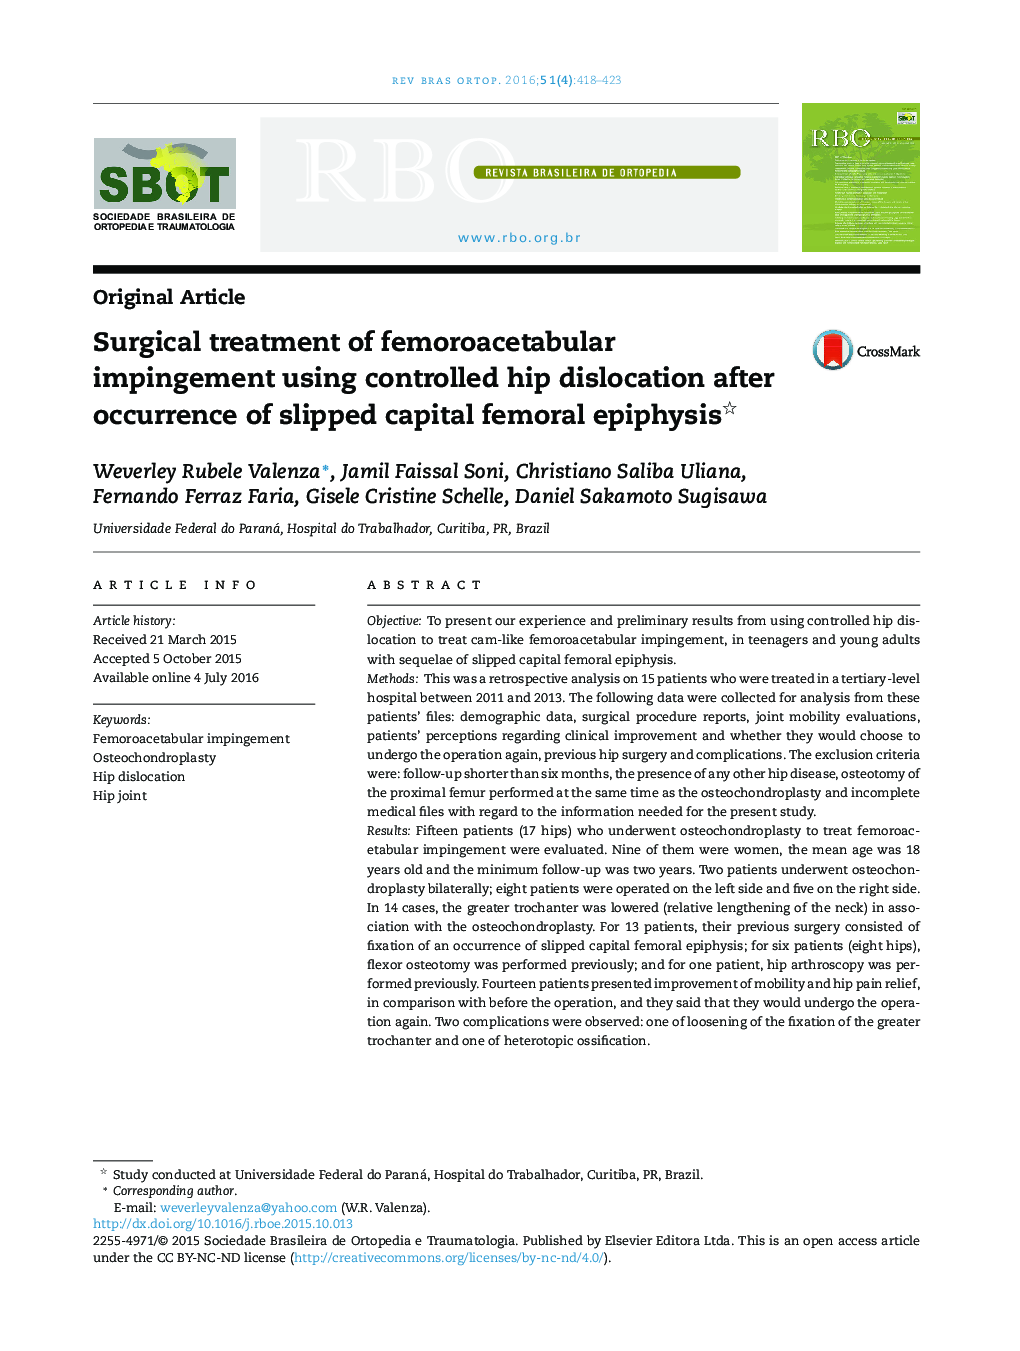 Surgical treatment of femoroacetabular impingement using controlled hip dislocation after occurrence of slipped capital femoral epiphysis 